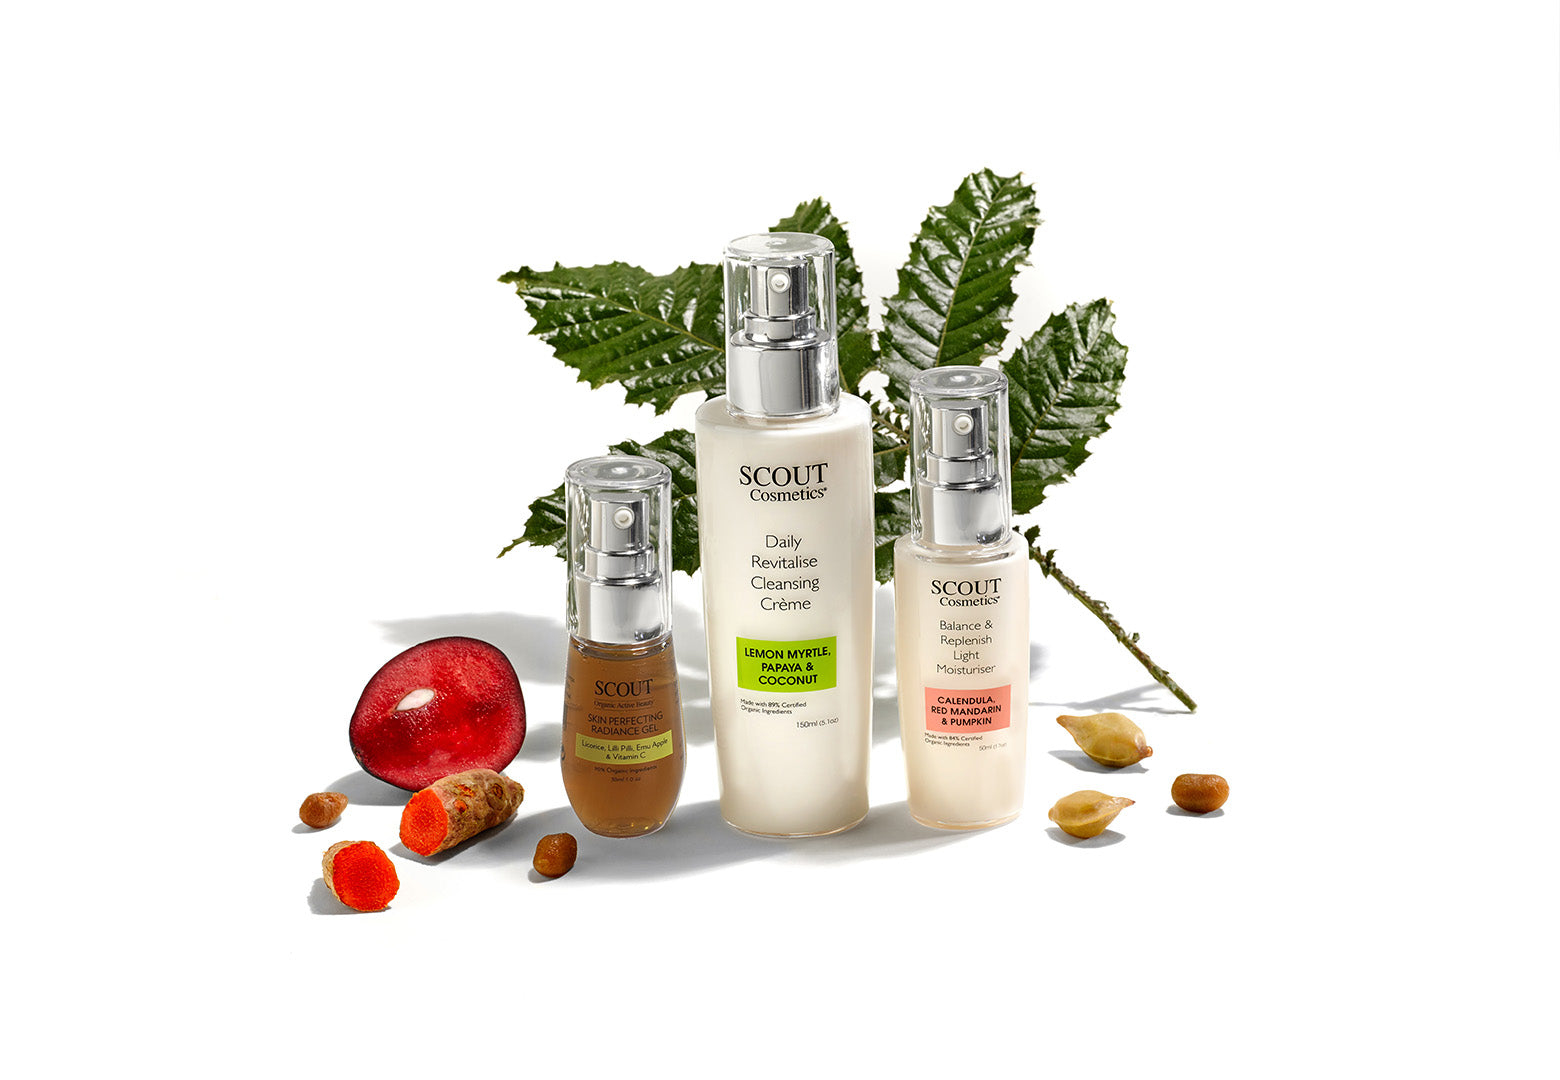 SCOUT certified organic skincare products